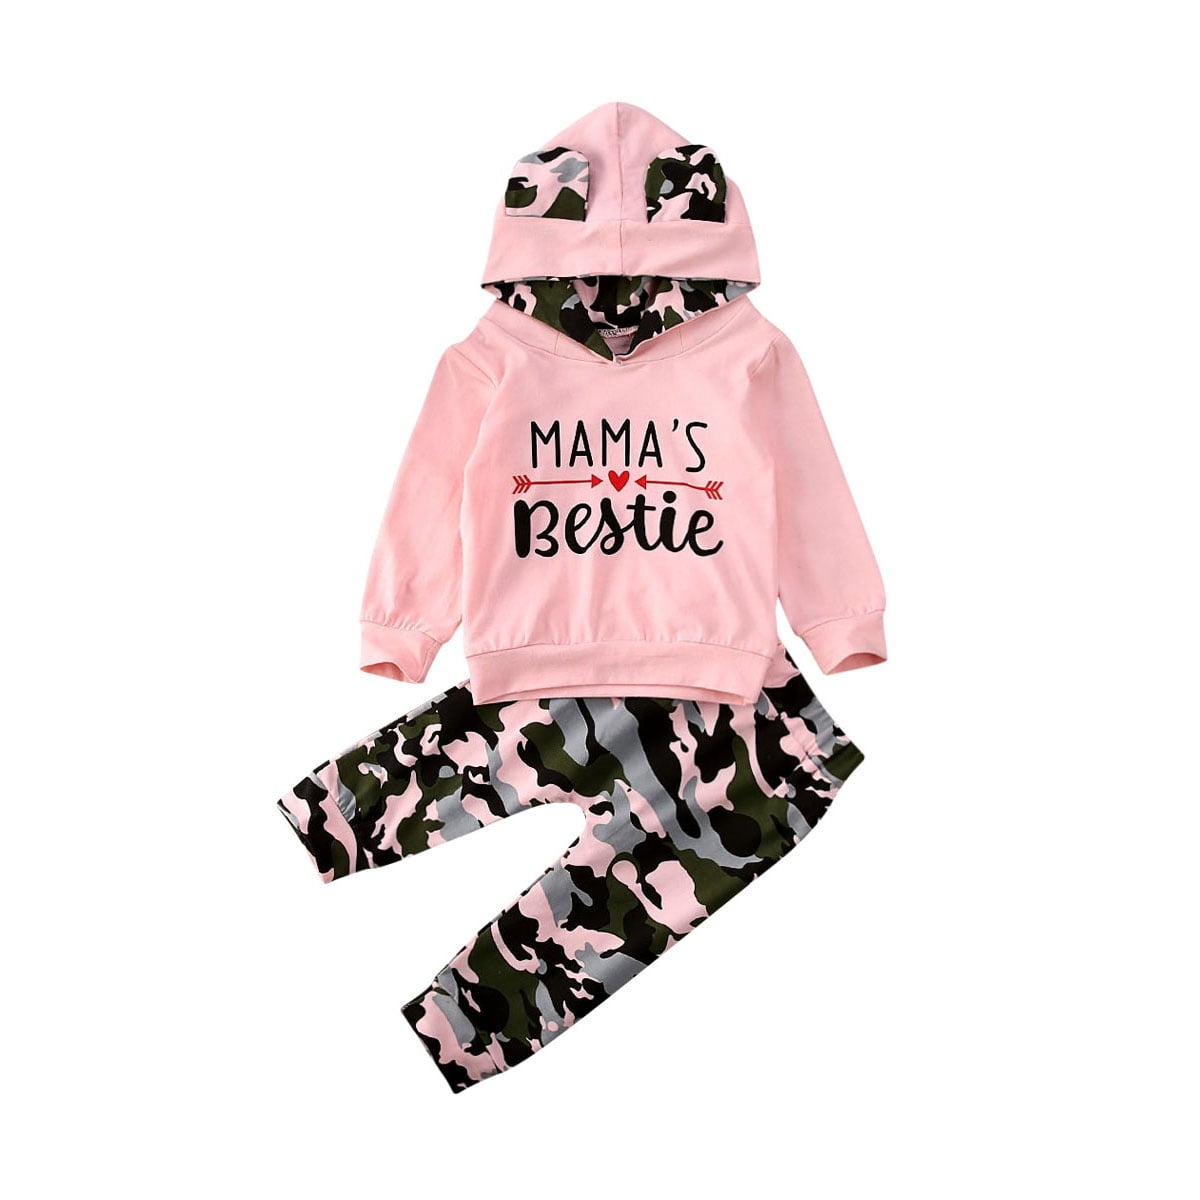 WARMWORD Baby Girl Clothes Set Newborn Long Sleeve Flowers Hoodie Tops+Pants Headband Outfit Sets 